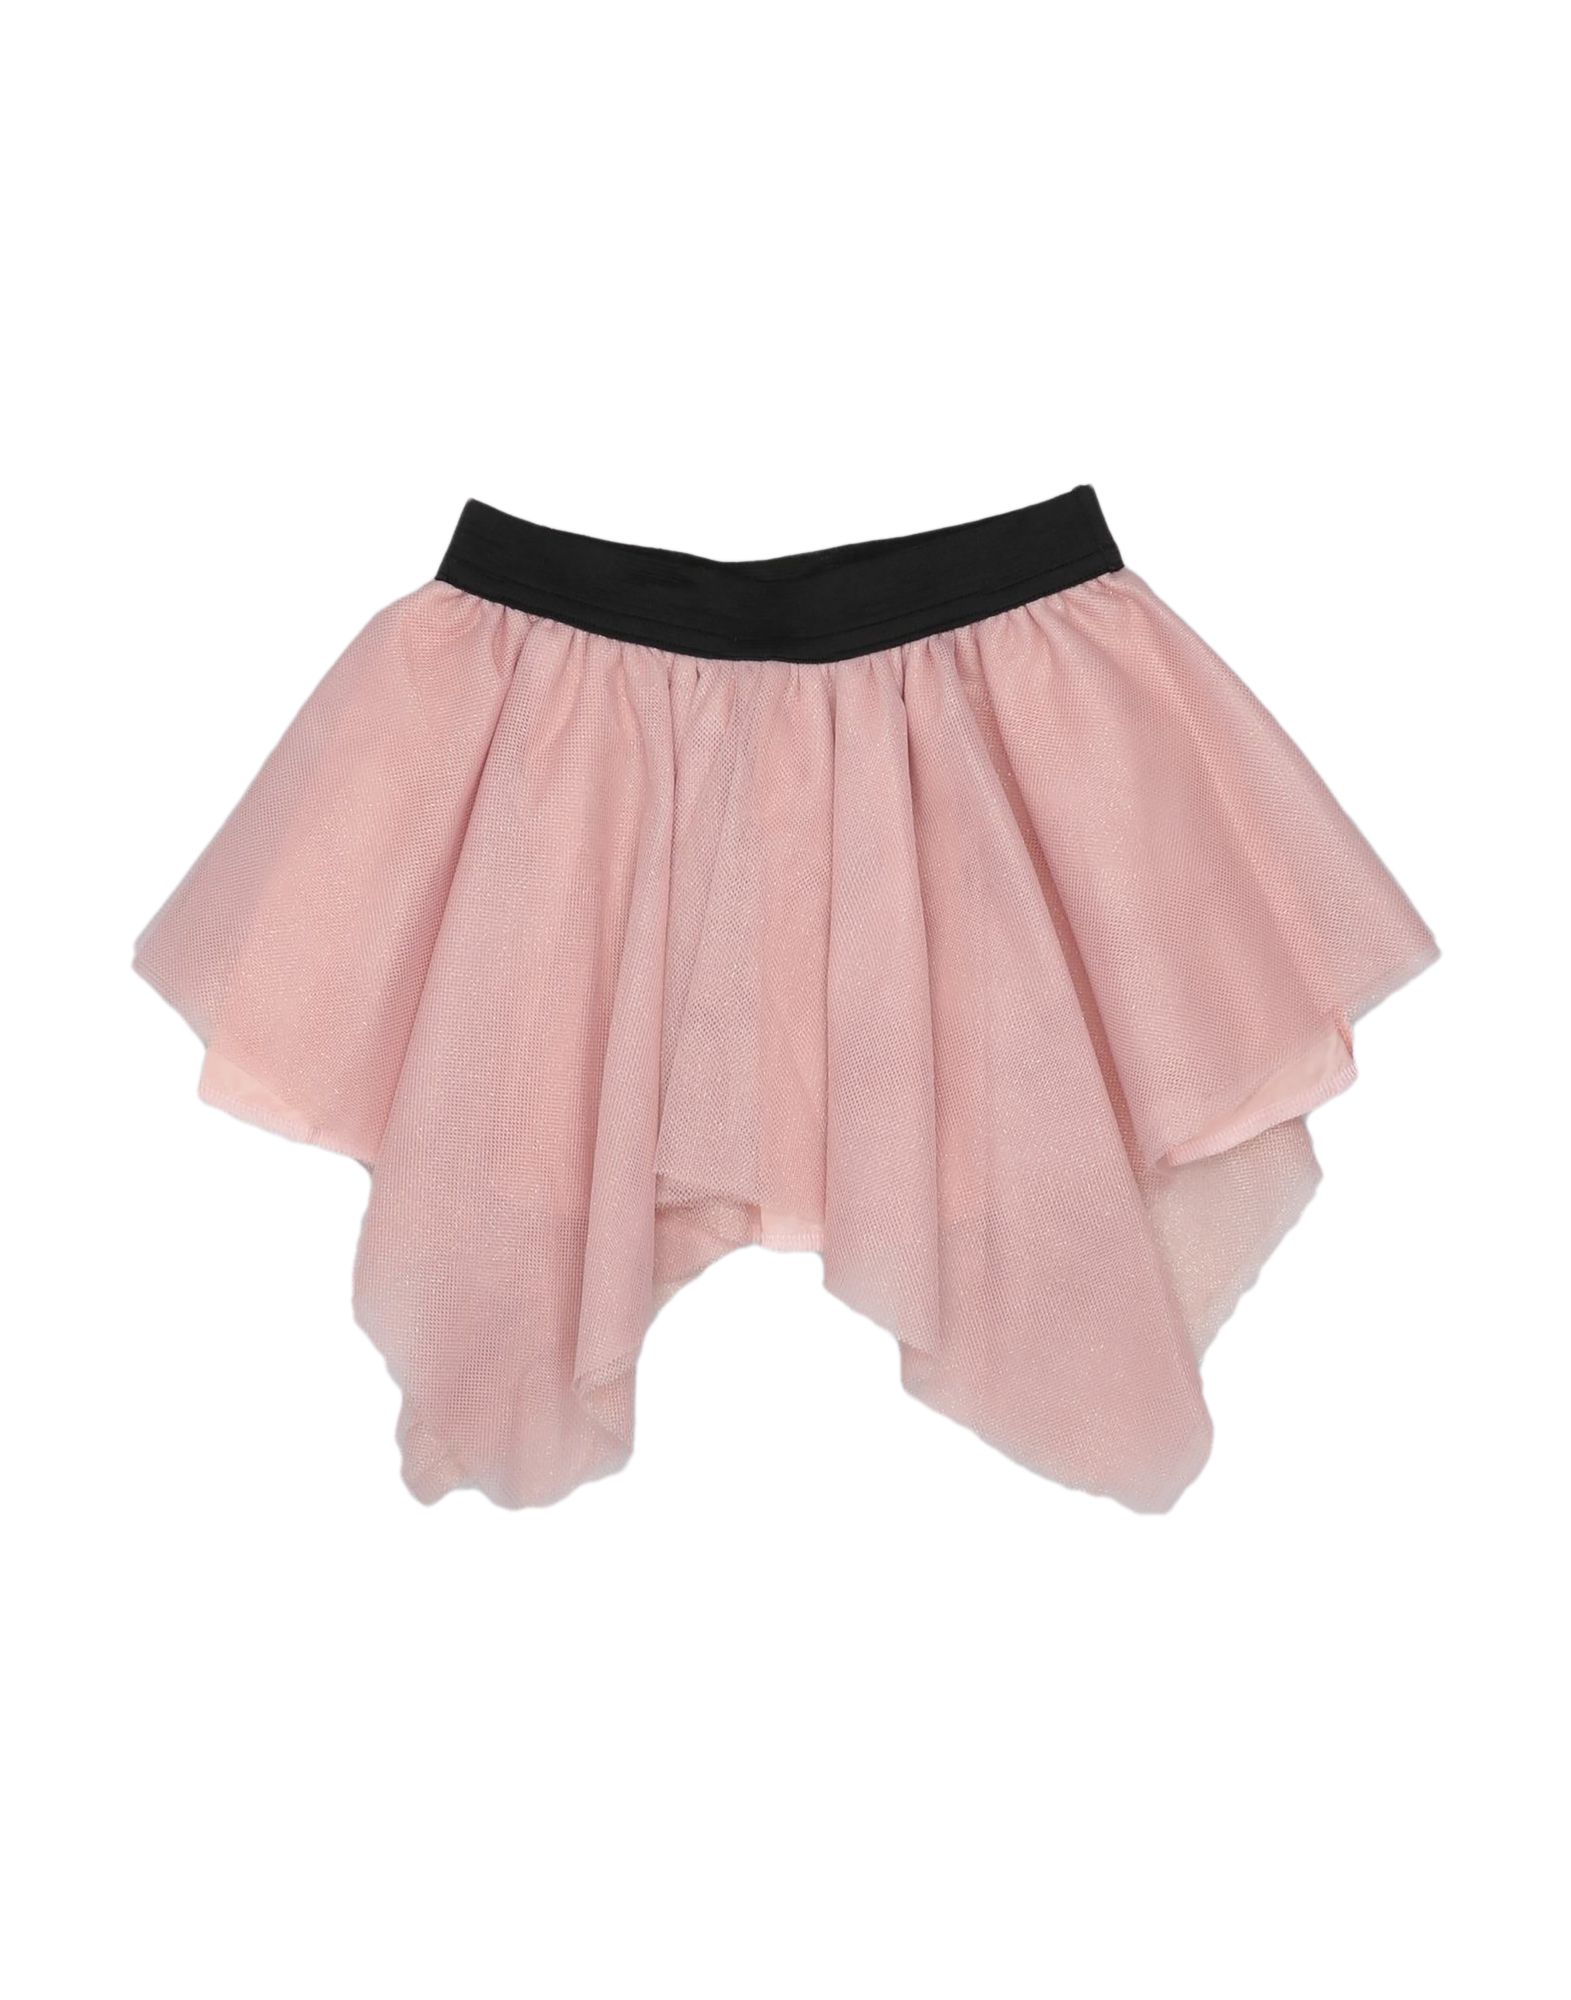 Dreamers Kids' Skirts In Pastel Pink